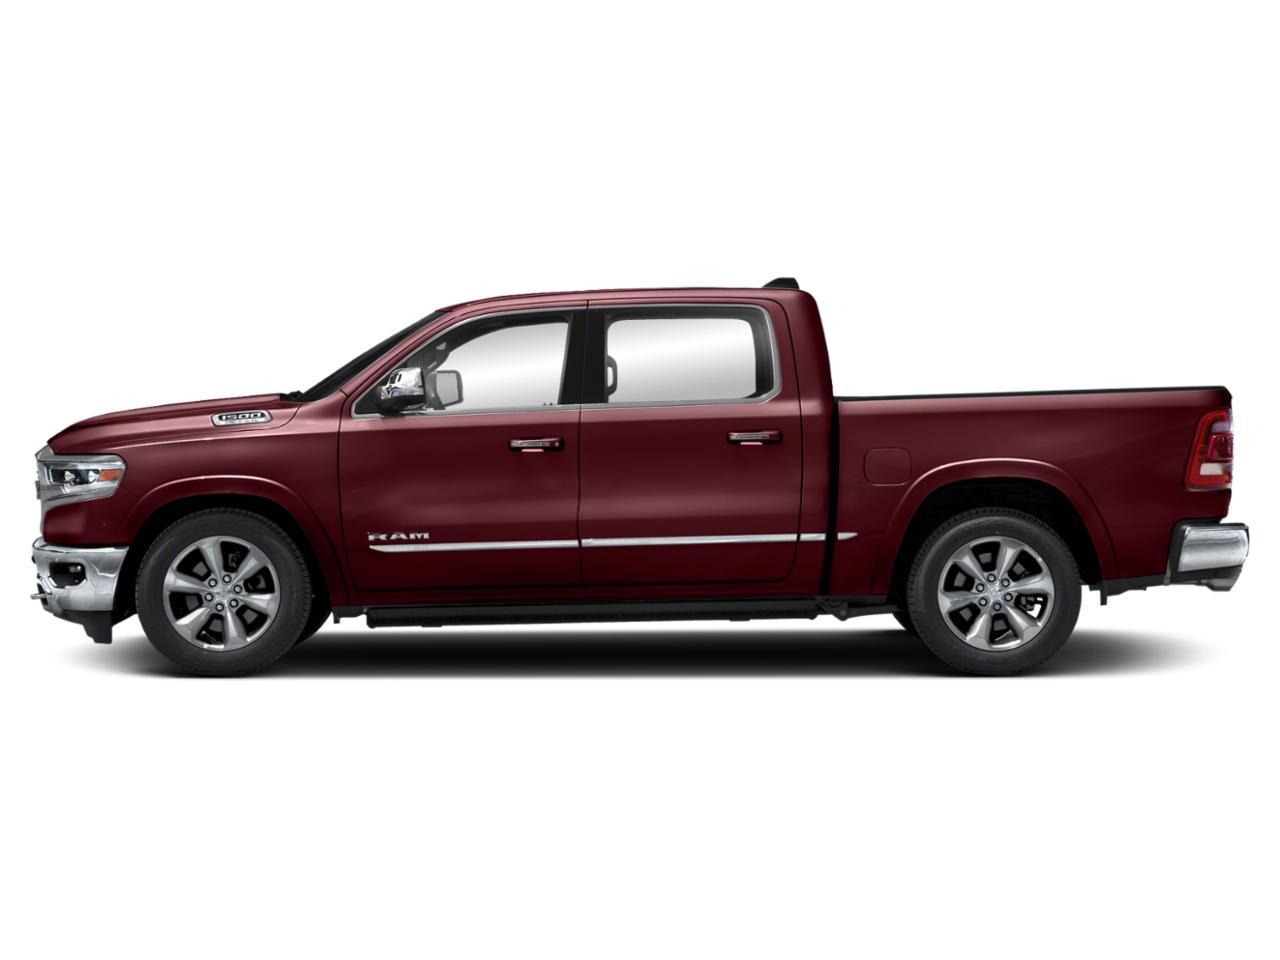 2021 Ram 1500 (Red) in MIAMI - Stock#:Z179648A